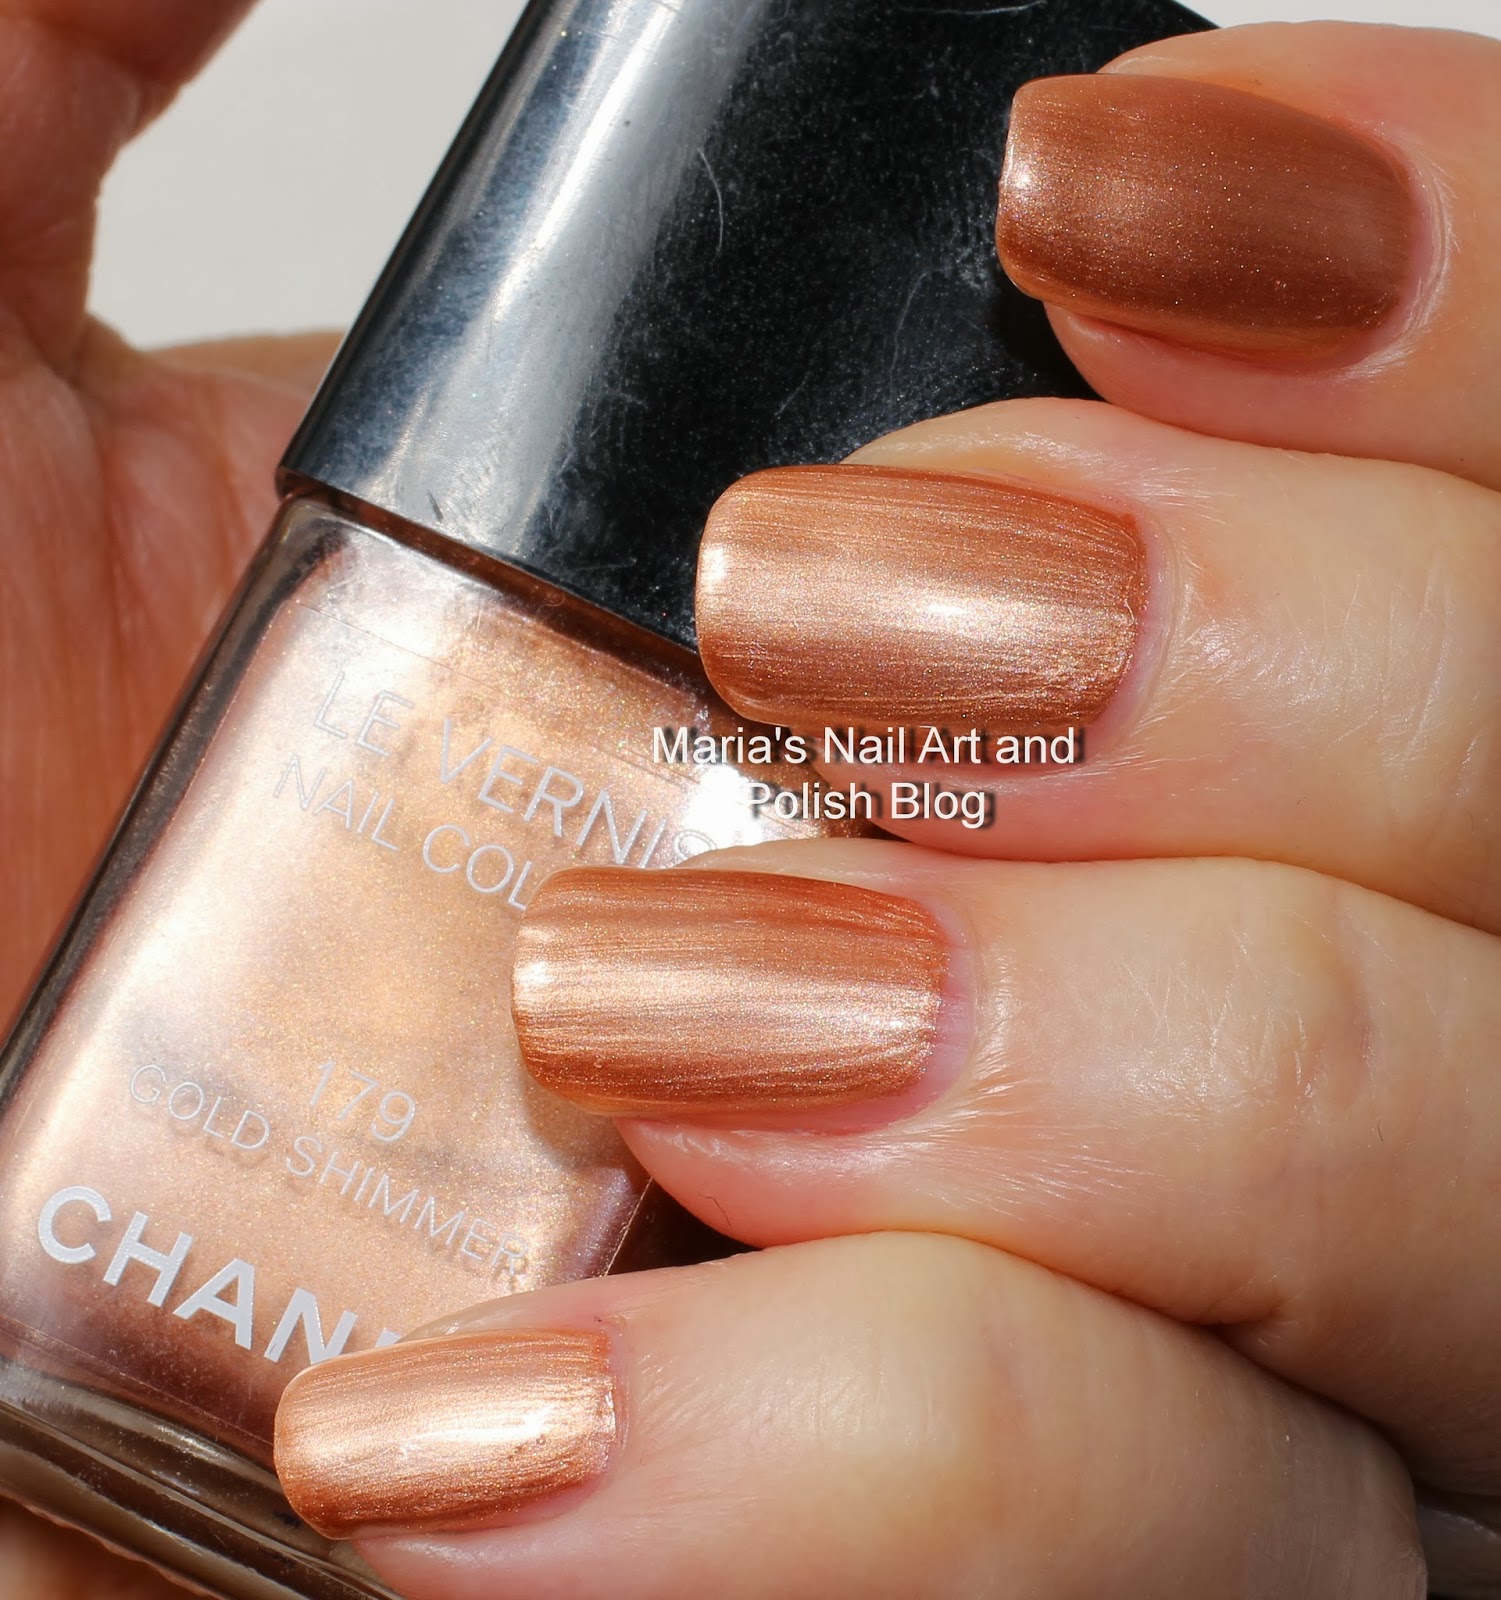 Marias Nail Art and Polish Blog: Chanel Gold Shimmer 179 swatches and  comparisons - Chanel Saturday